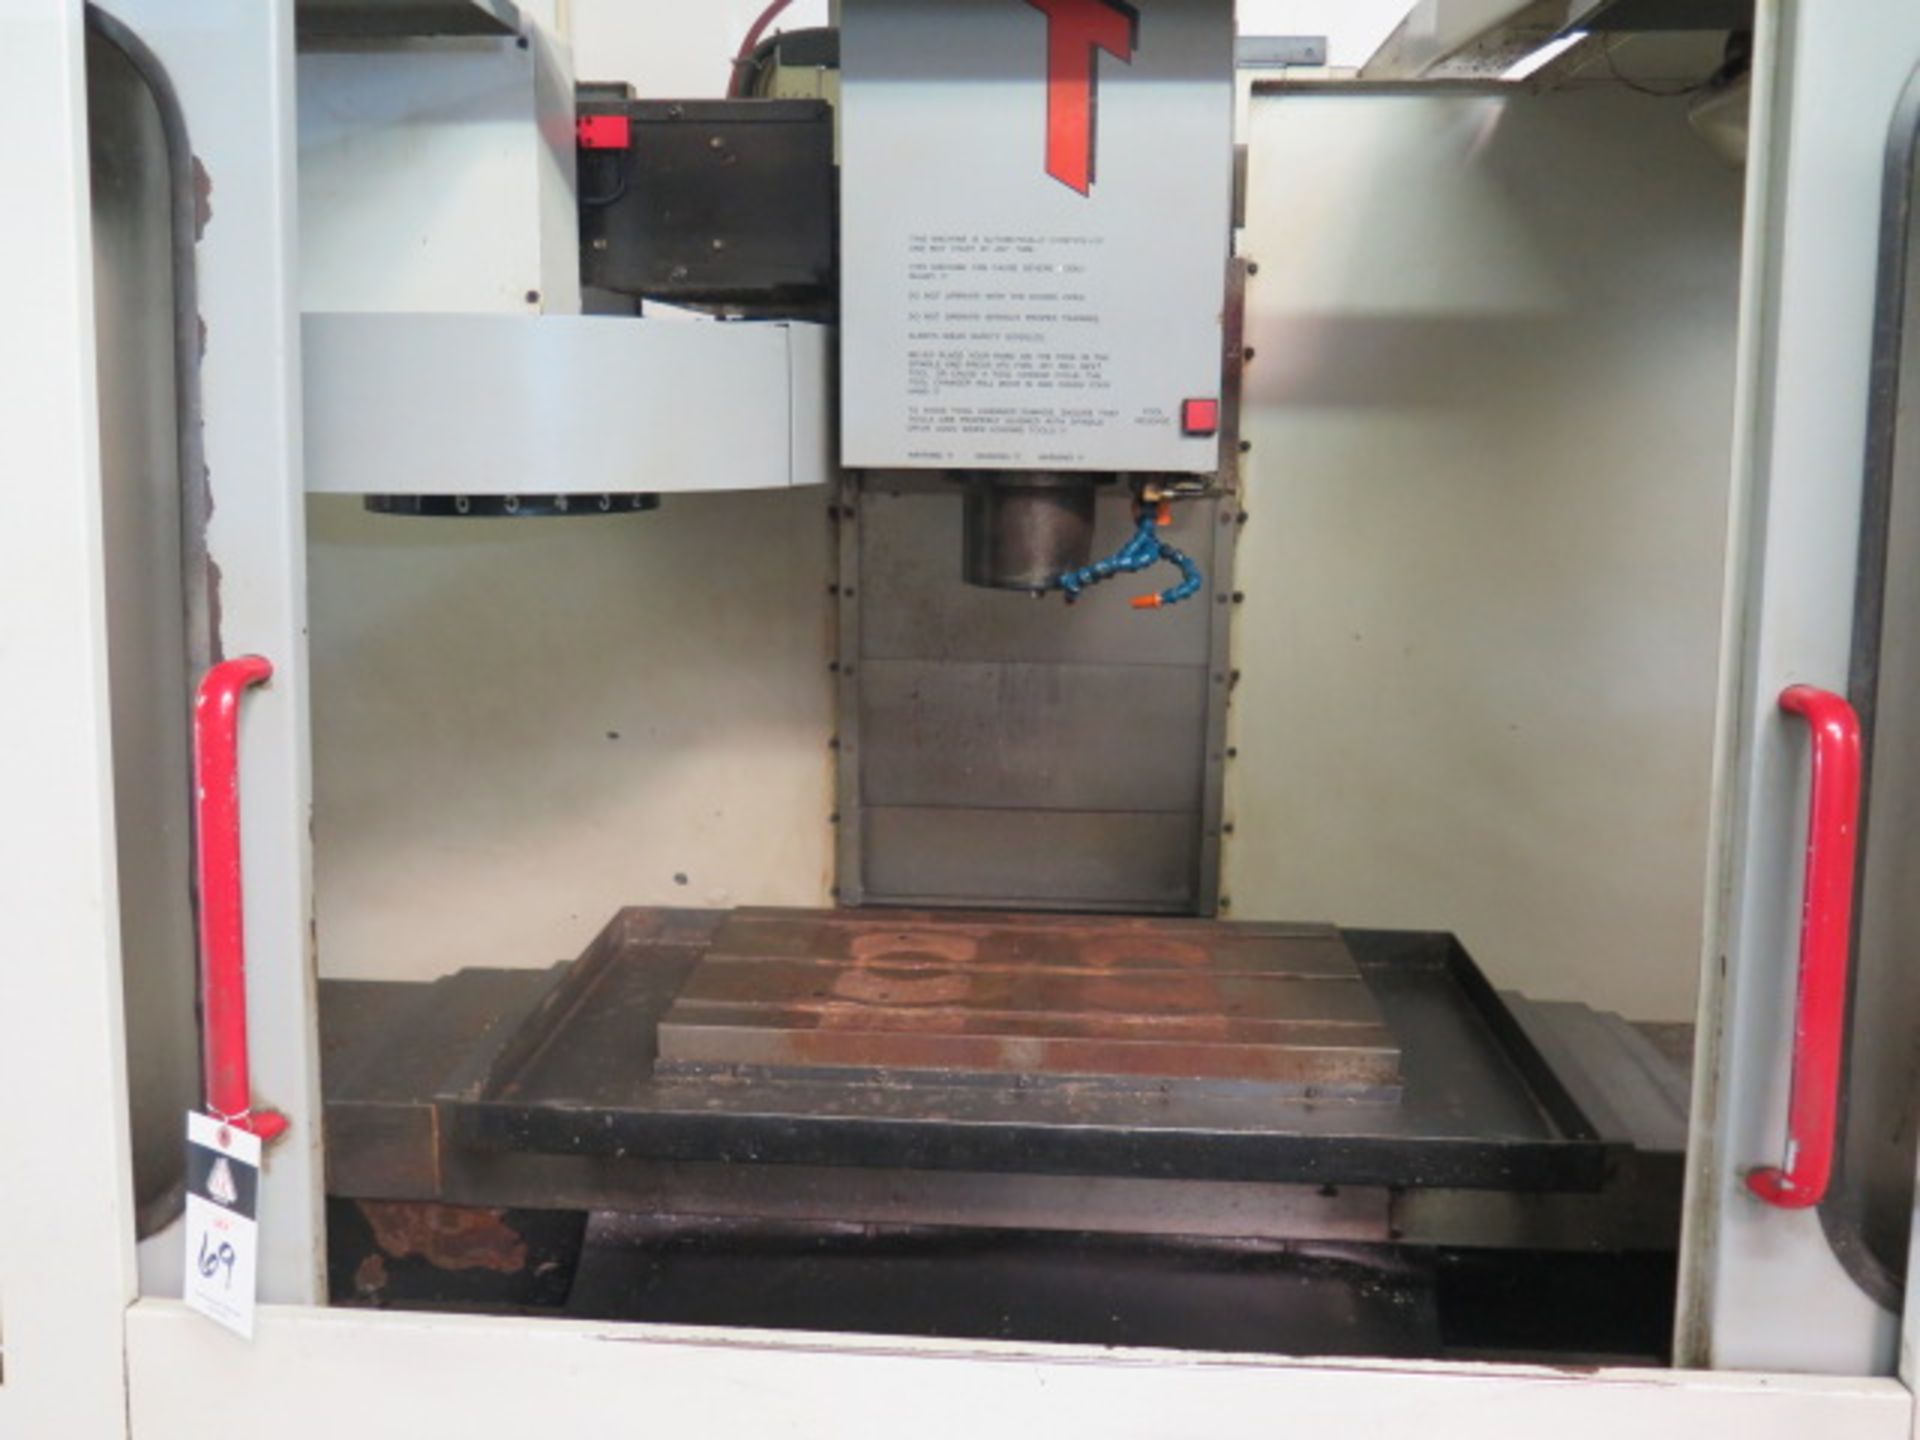 1996 Haas VF-E CNC VMC s/n 7726 w/ Haas Controls, 20-Station ATC, CAT-40 Taper, SOLD AS IS - Image 6 of 16